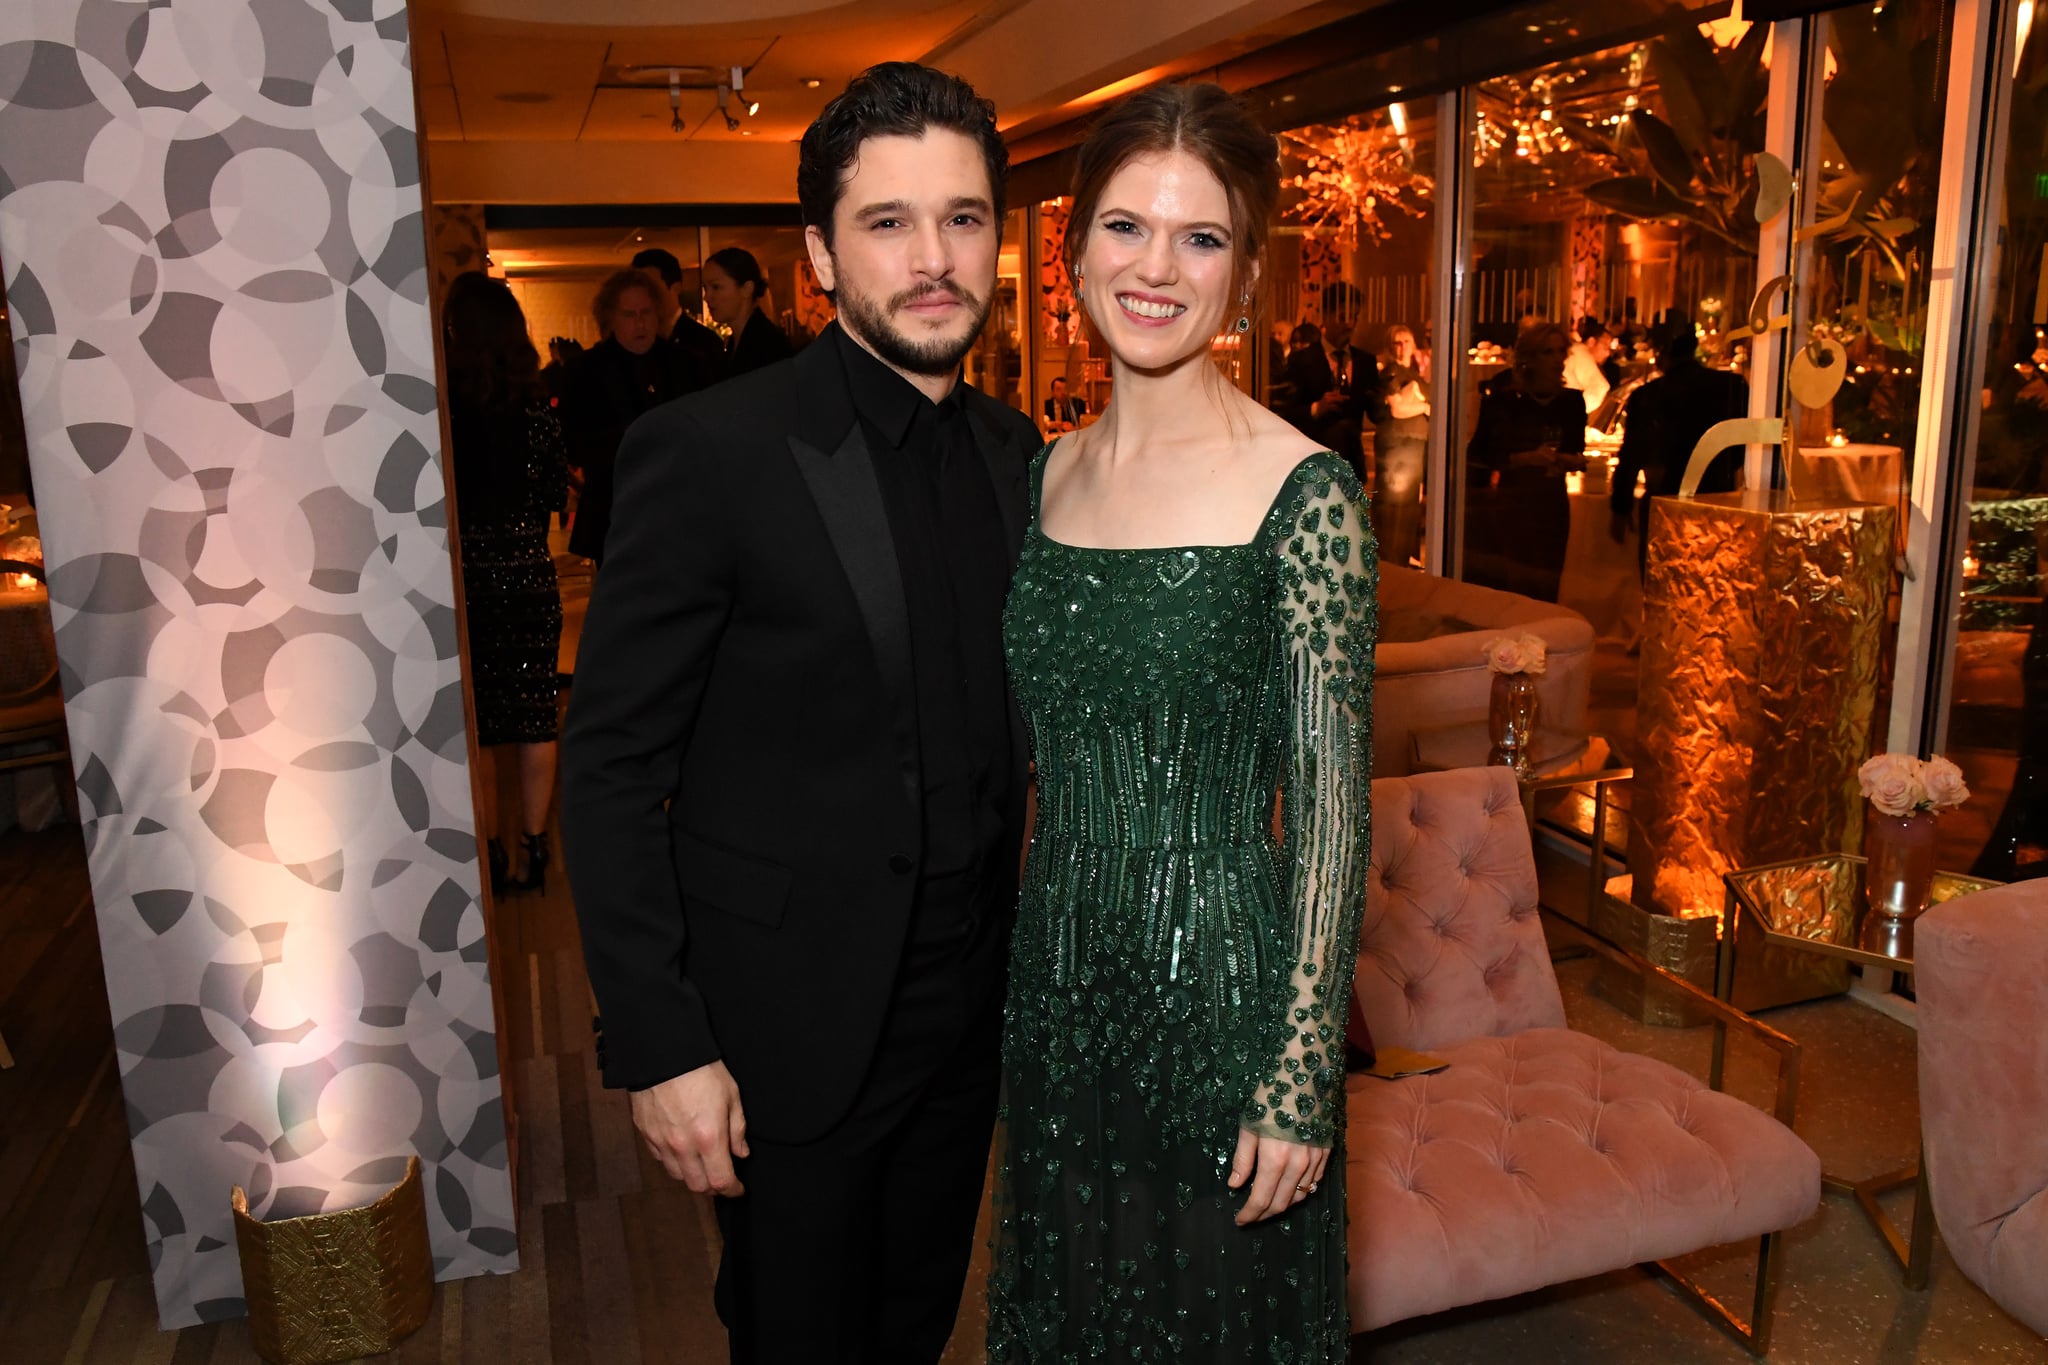 LOS ANGELES, CALIFORNIA - JANUARY 05: (L-R) Kit Harington and Rose Leslie attend HBO's Official 2020 Golden Globe Awards After Party on January 05, 2020 in Los Angeles, California. (Photo by Jeff Kravitz/FilmMagic for HBO)